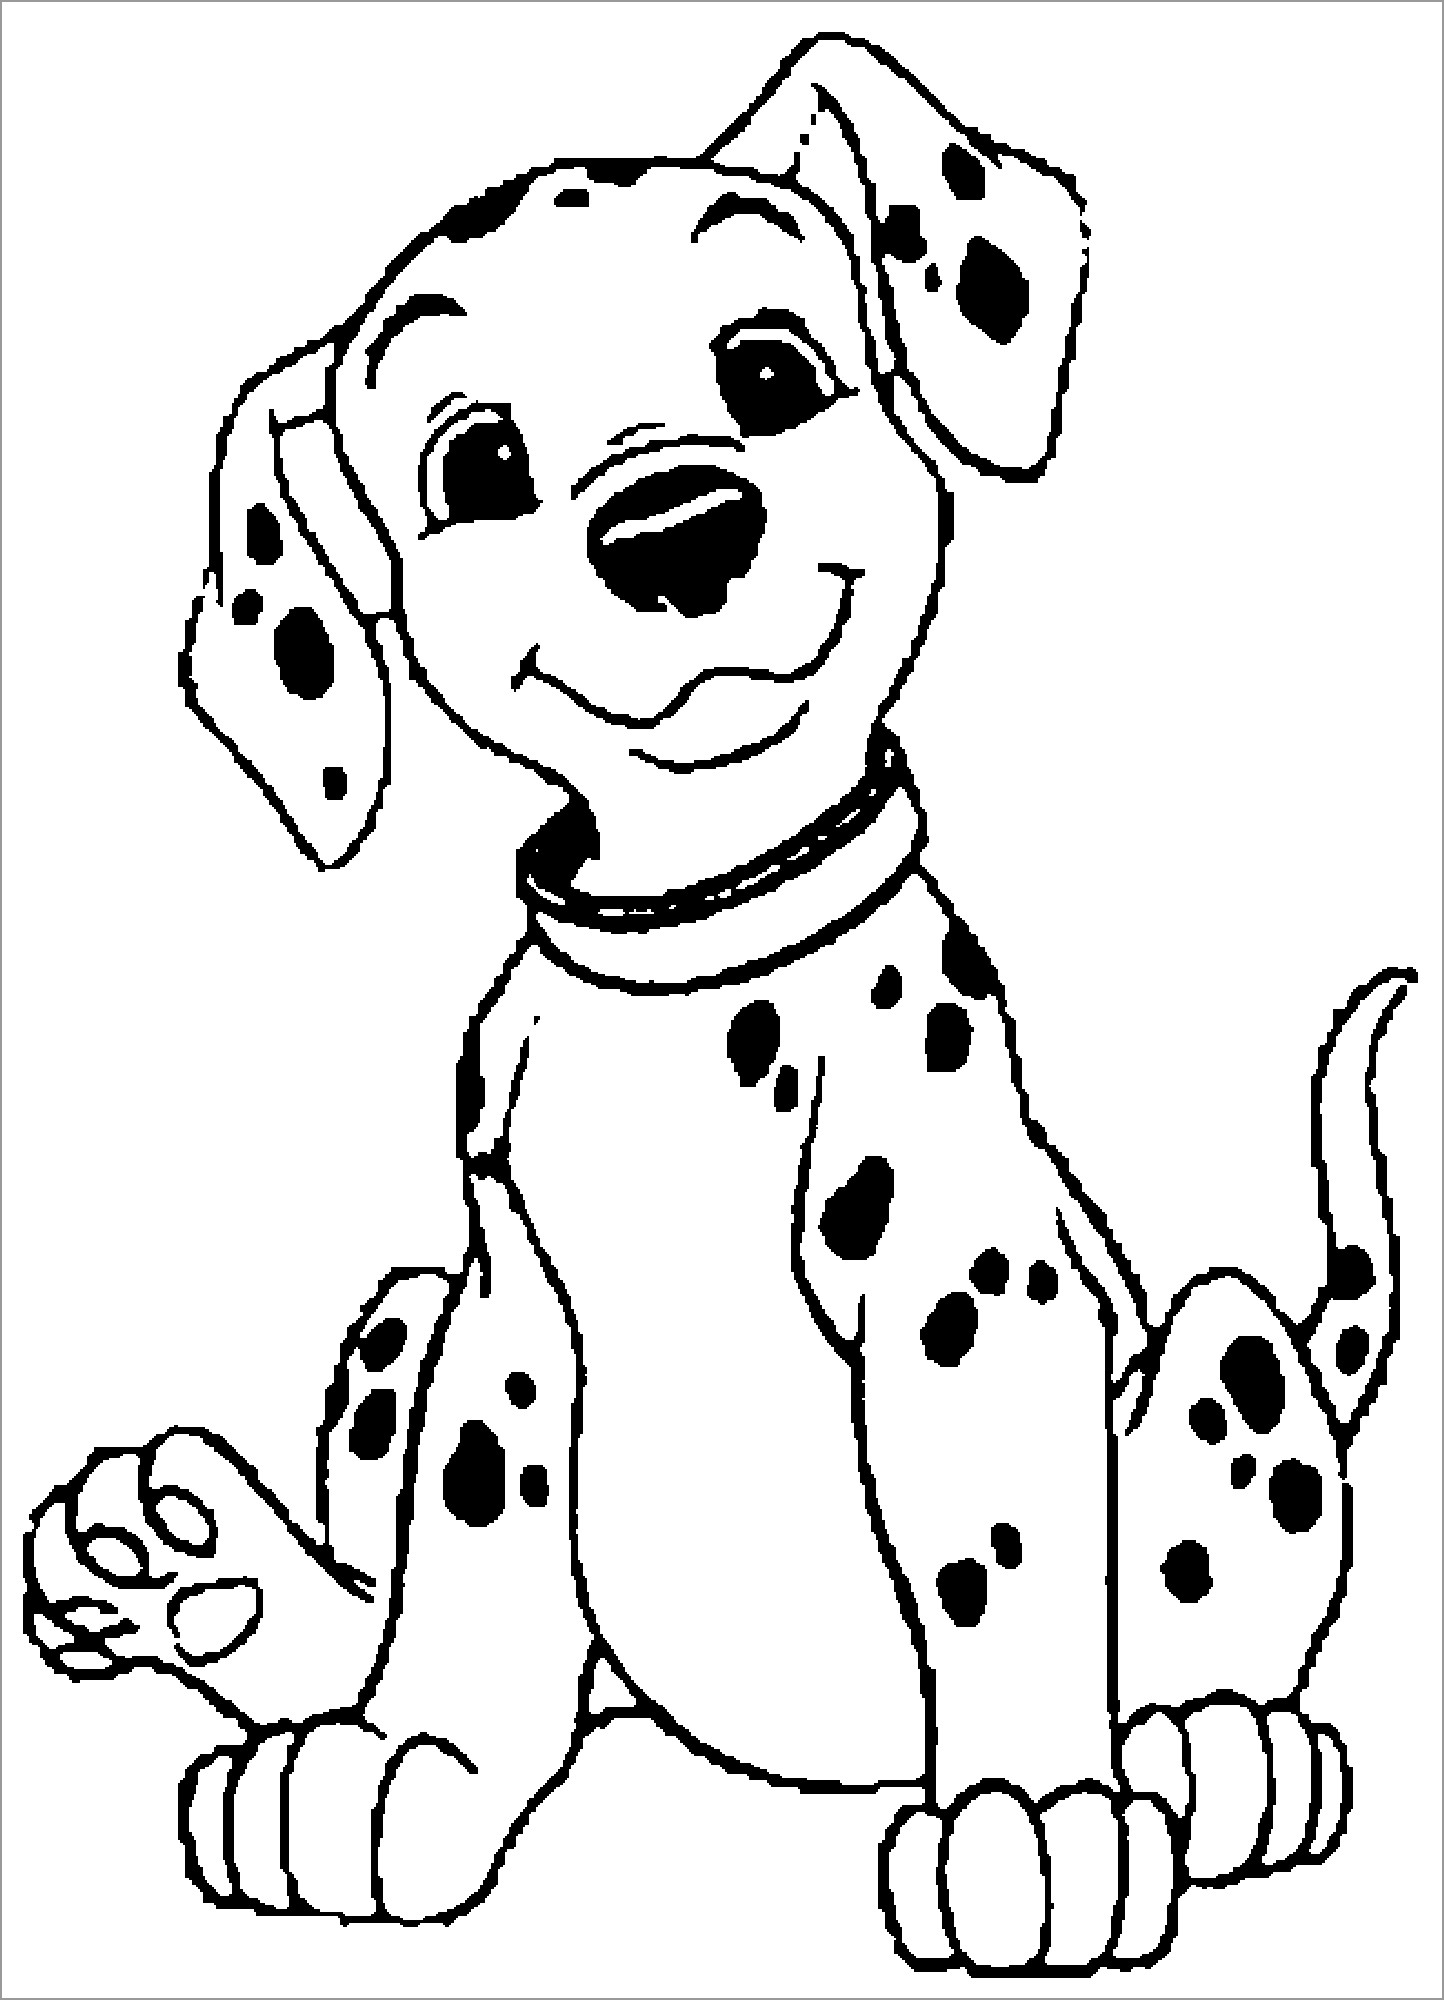 101 Dalmatians Coloring Page For Kids ColoringBay